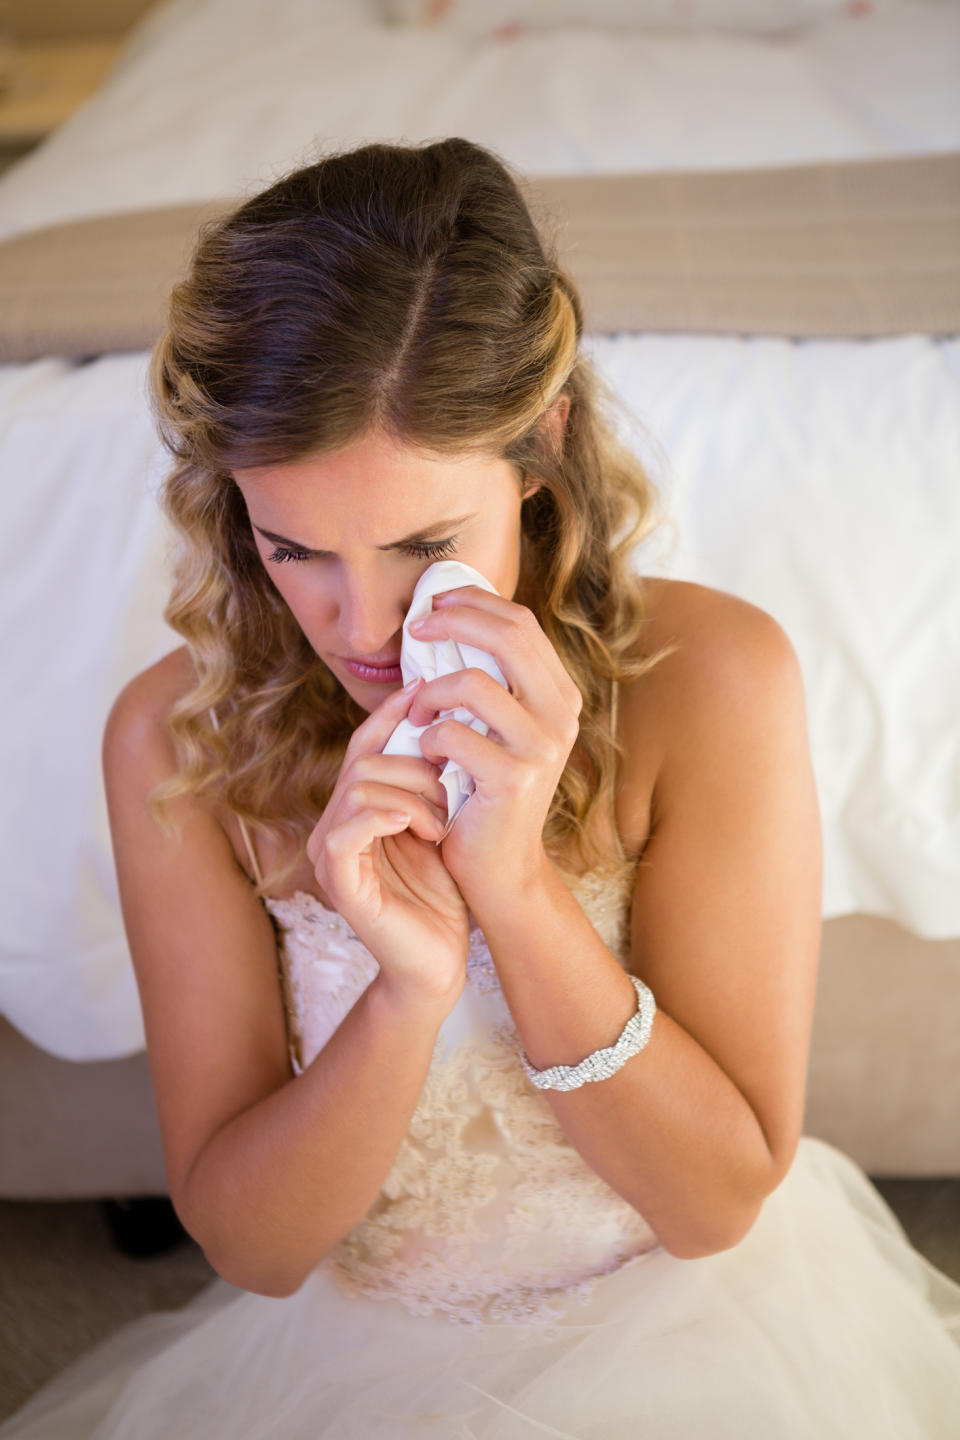 A bride in a wedding dress sits on a bed while wiping away her tears with a tissue, appearing emotional